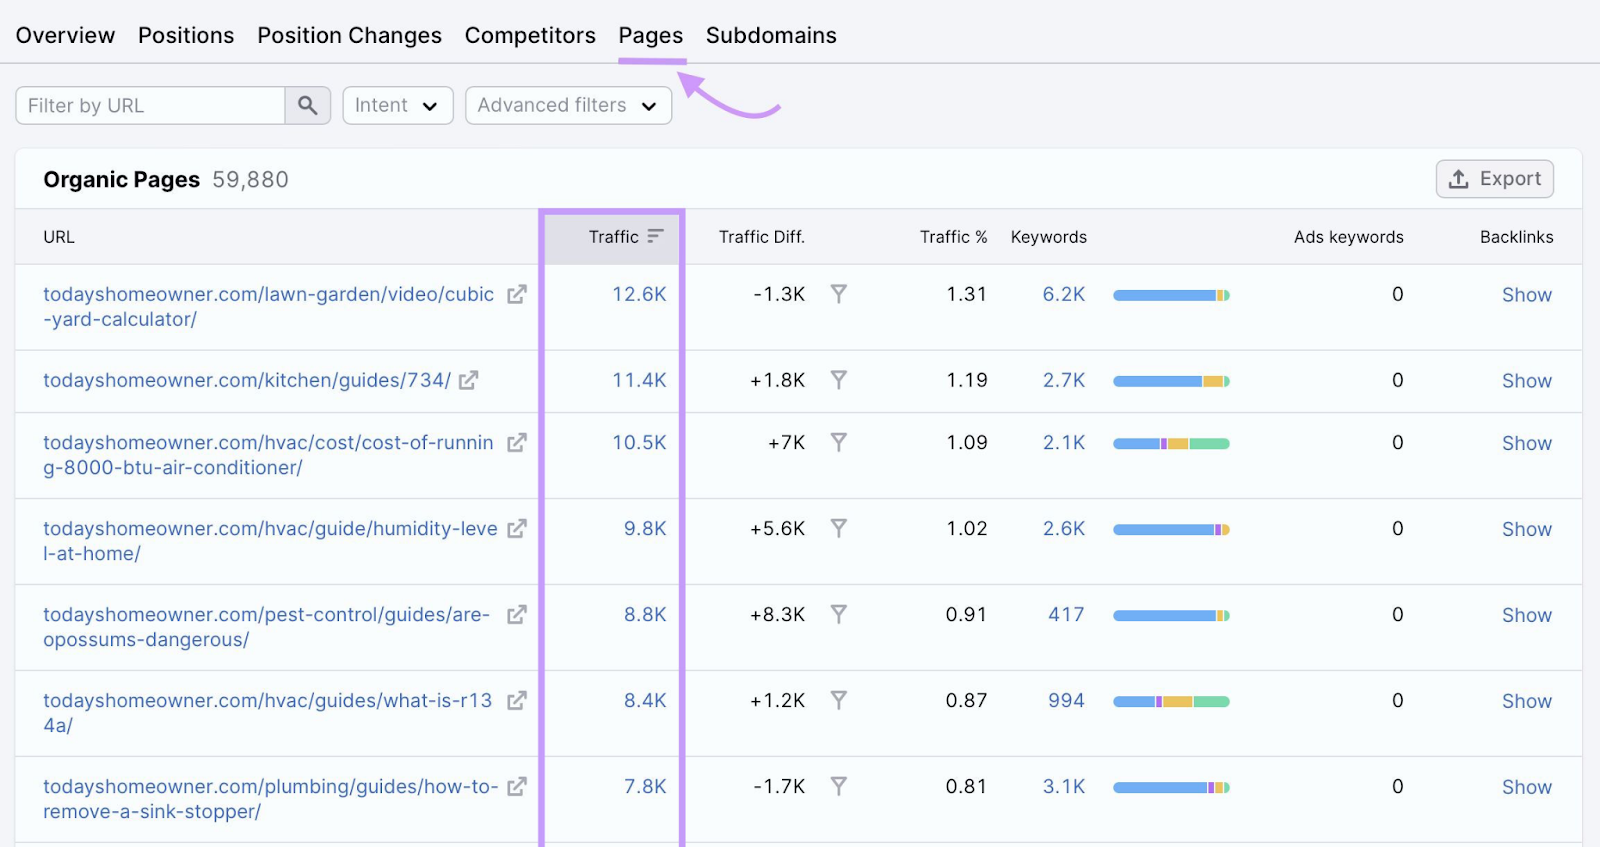 Semrush organic research tool pages tab showing pages of todayshomeowner.com generating the most traffic.